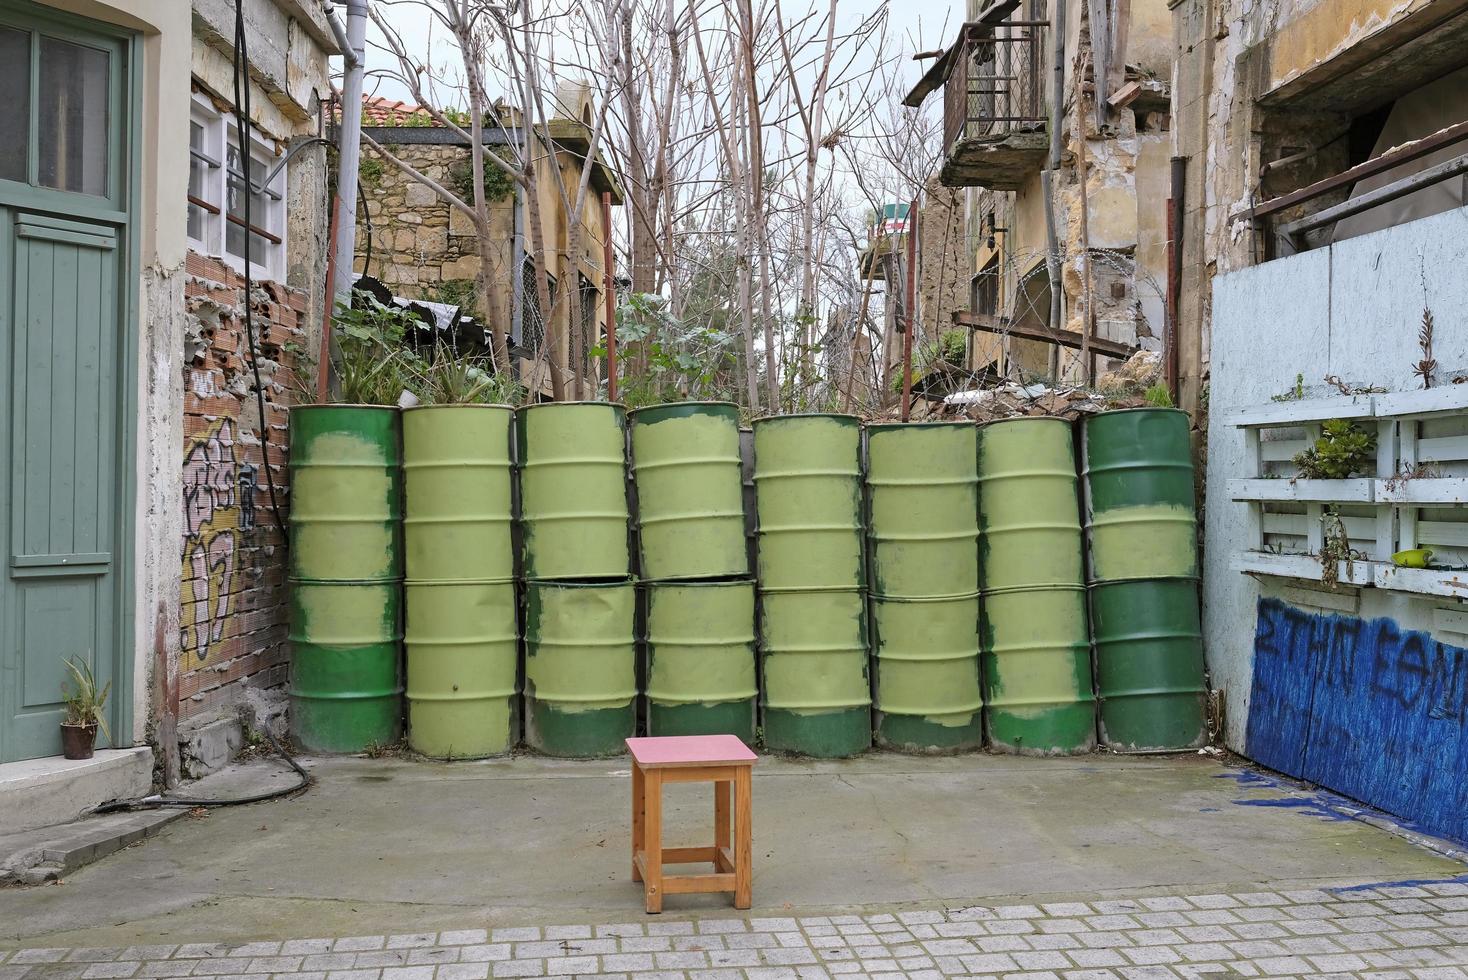 Nicosia, Cyprus, 2020 - Barrels used as a barrier at the border Green Line in Nicosia, Cyprus photo